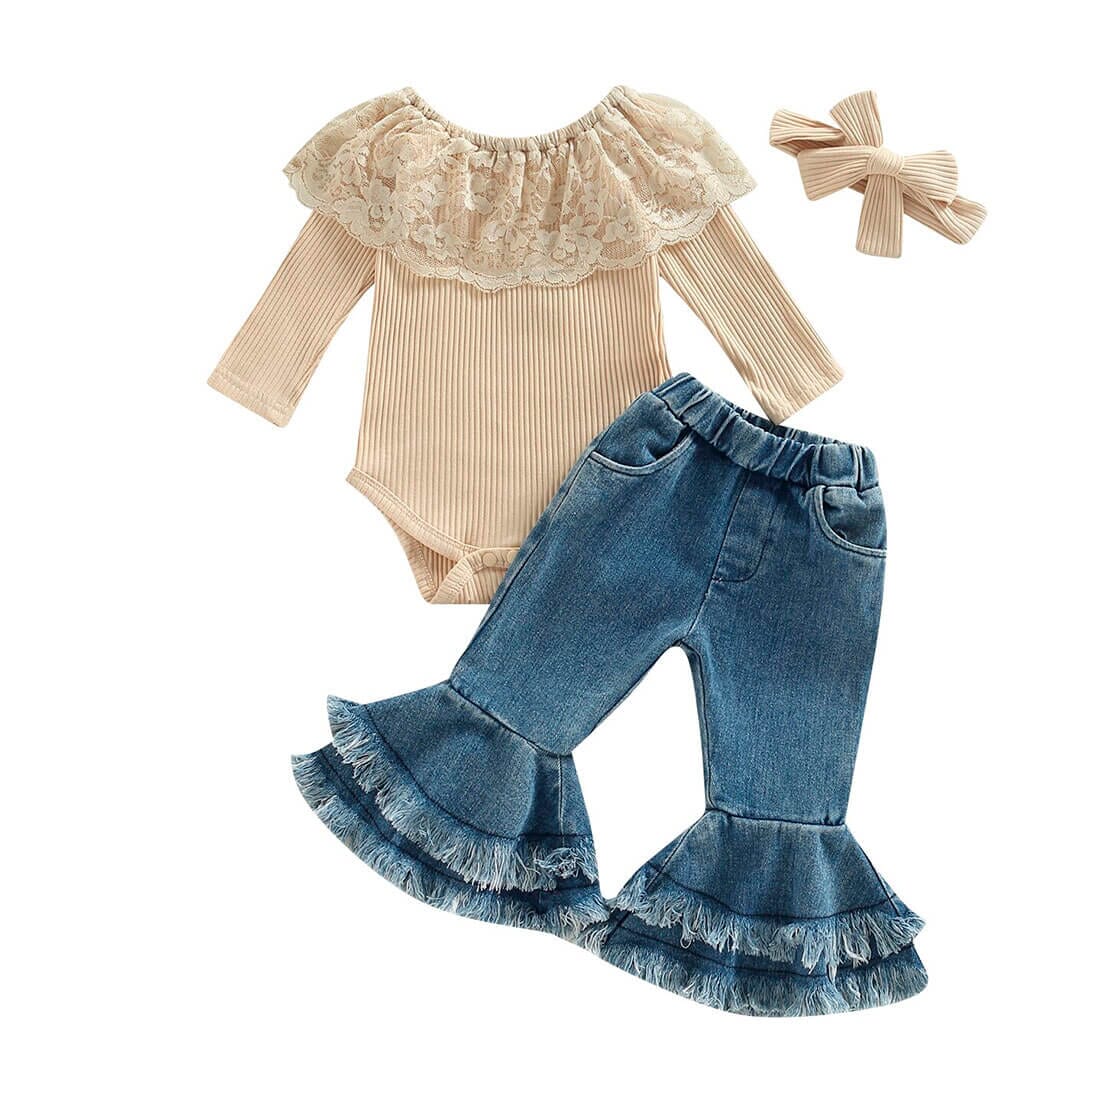 Kids Clothing - Buy Kids Clothes, Dresses & Bottom wear Online in